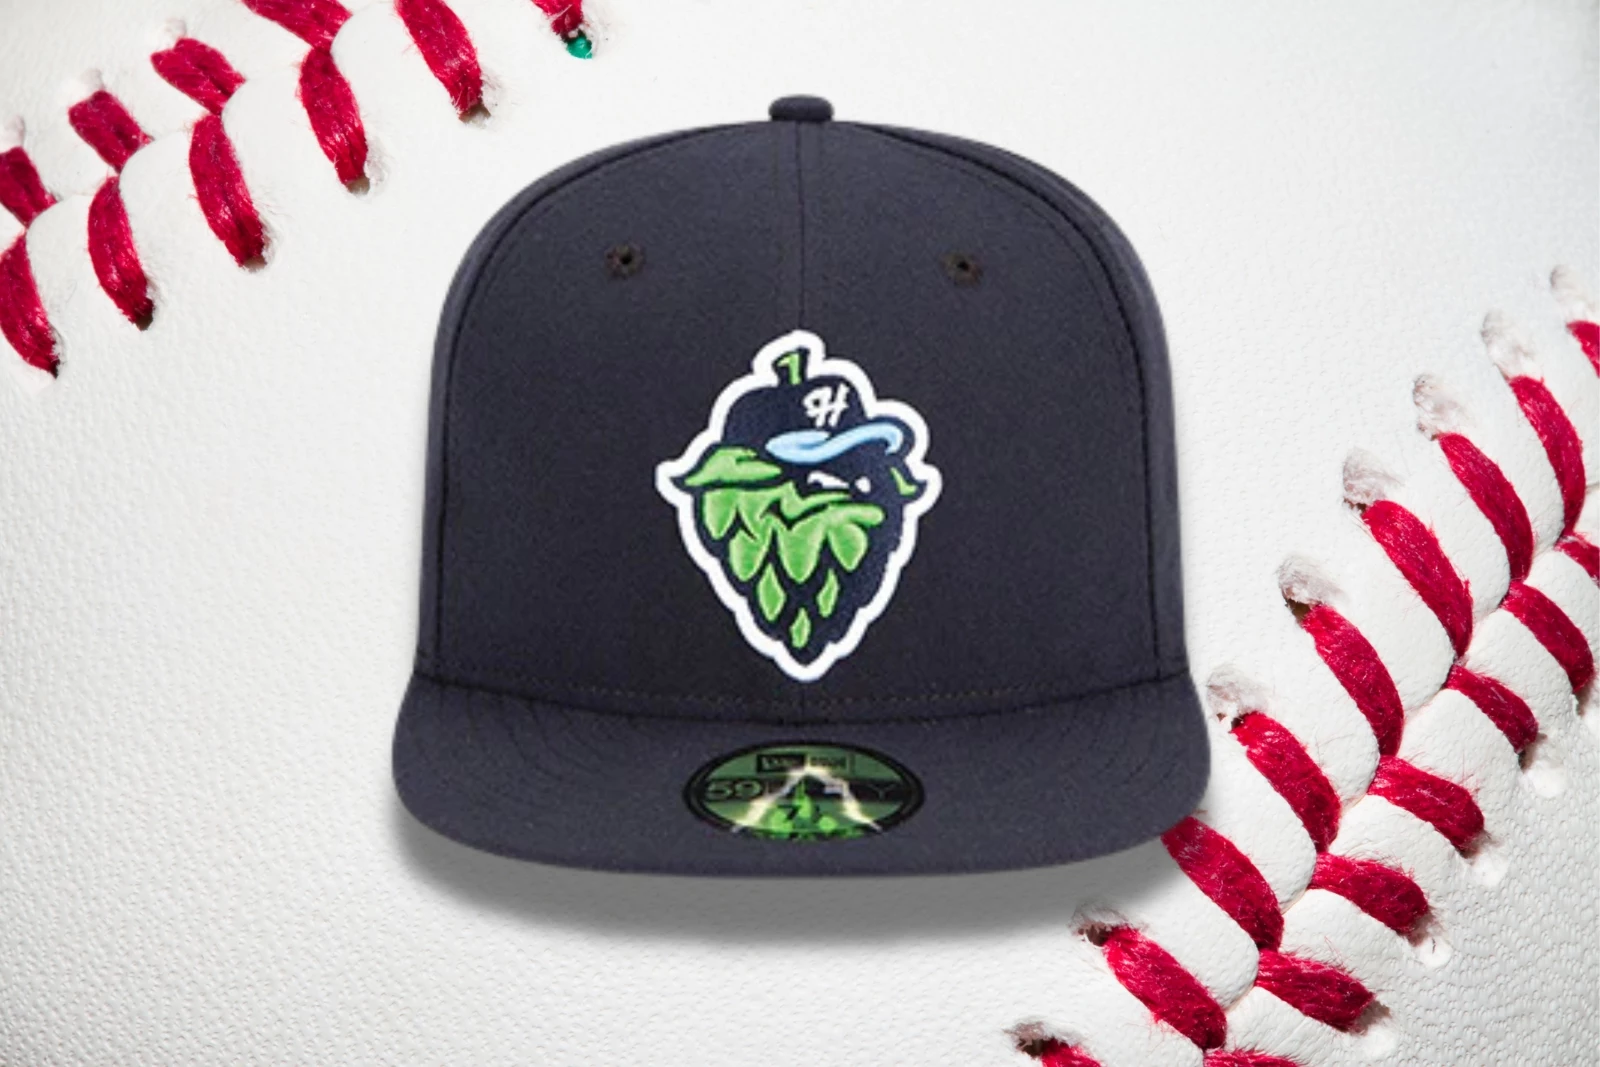 Hillsboro Hops hires first woman as manager, 2nd time in Minor League  history